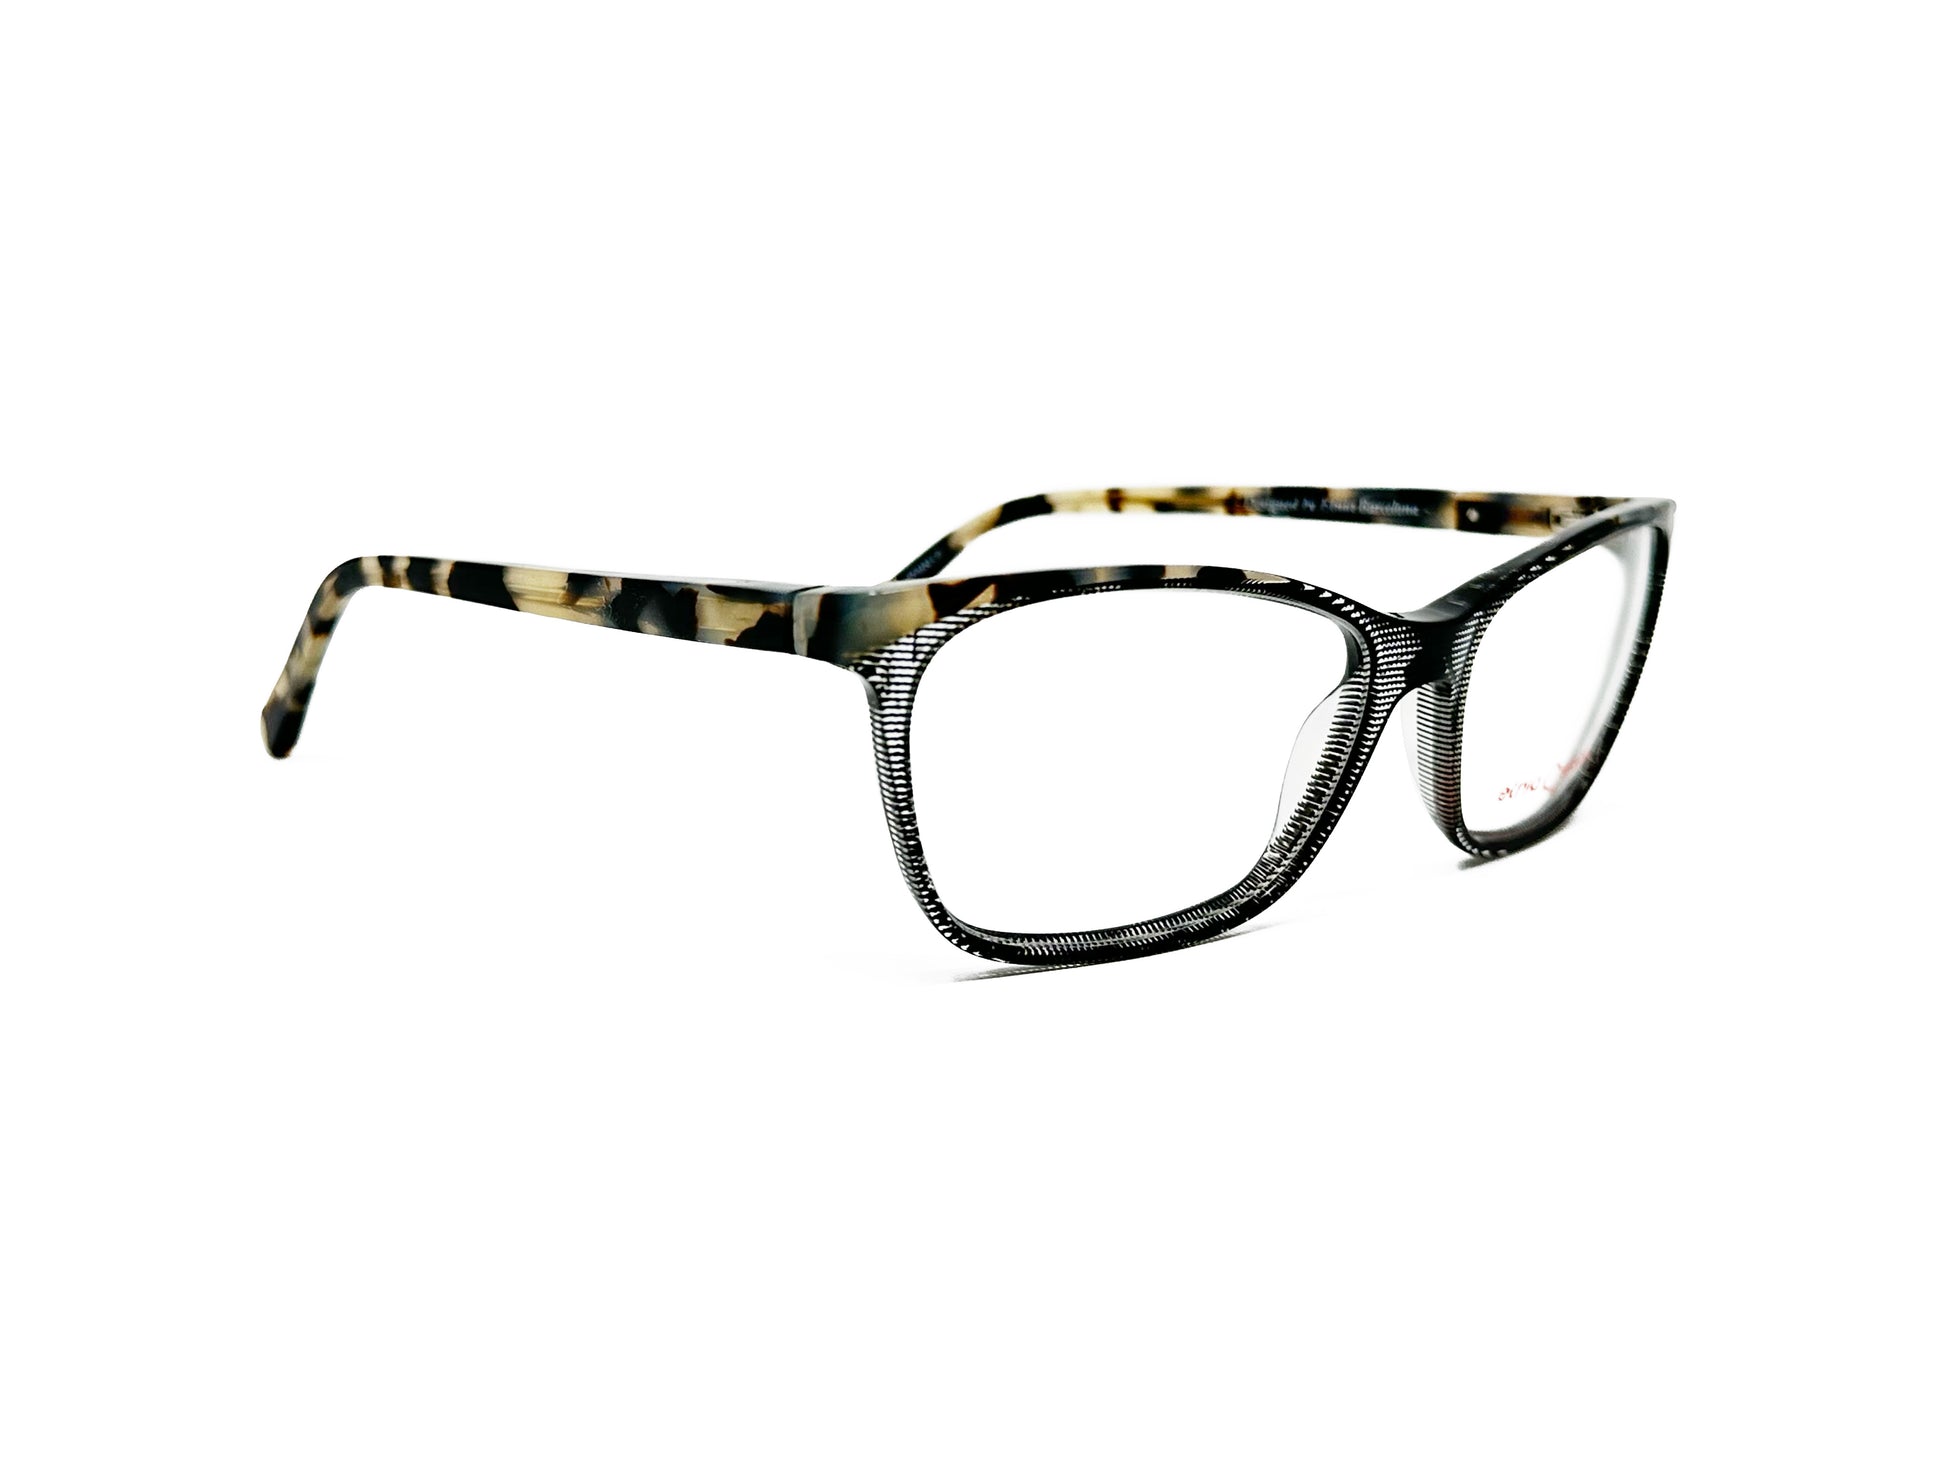 Etnia Barcelona narrow, rectangular, cat-eye, acetate optical frame. Model: Nimes 15. Color: BKHV - Transparent with black dots in the center of frame, gradiated out into a tortoise on corners and side of frame. Side view.